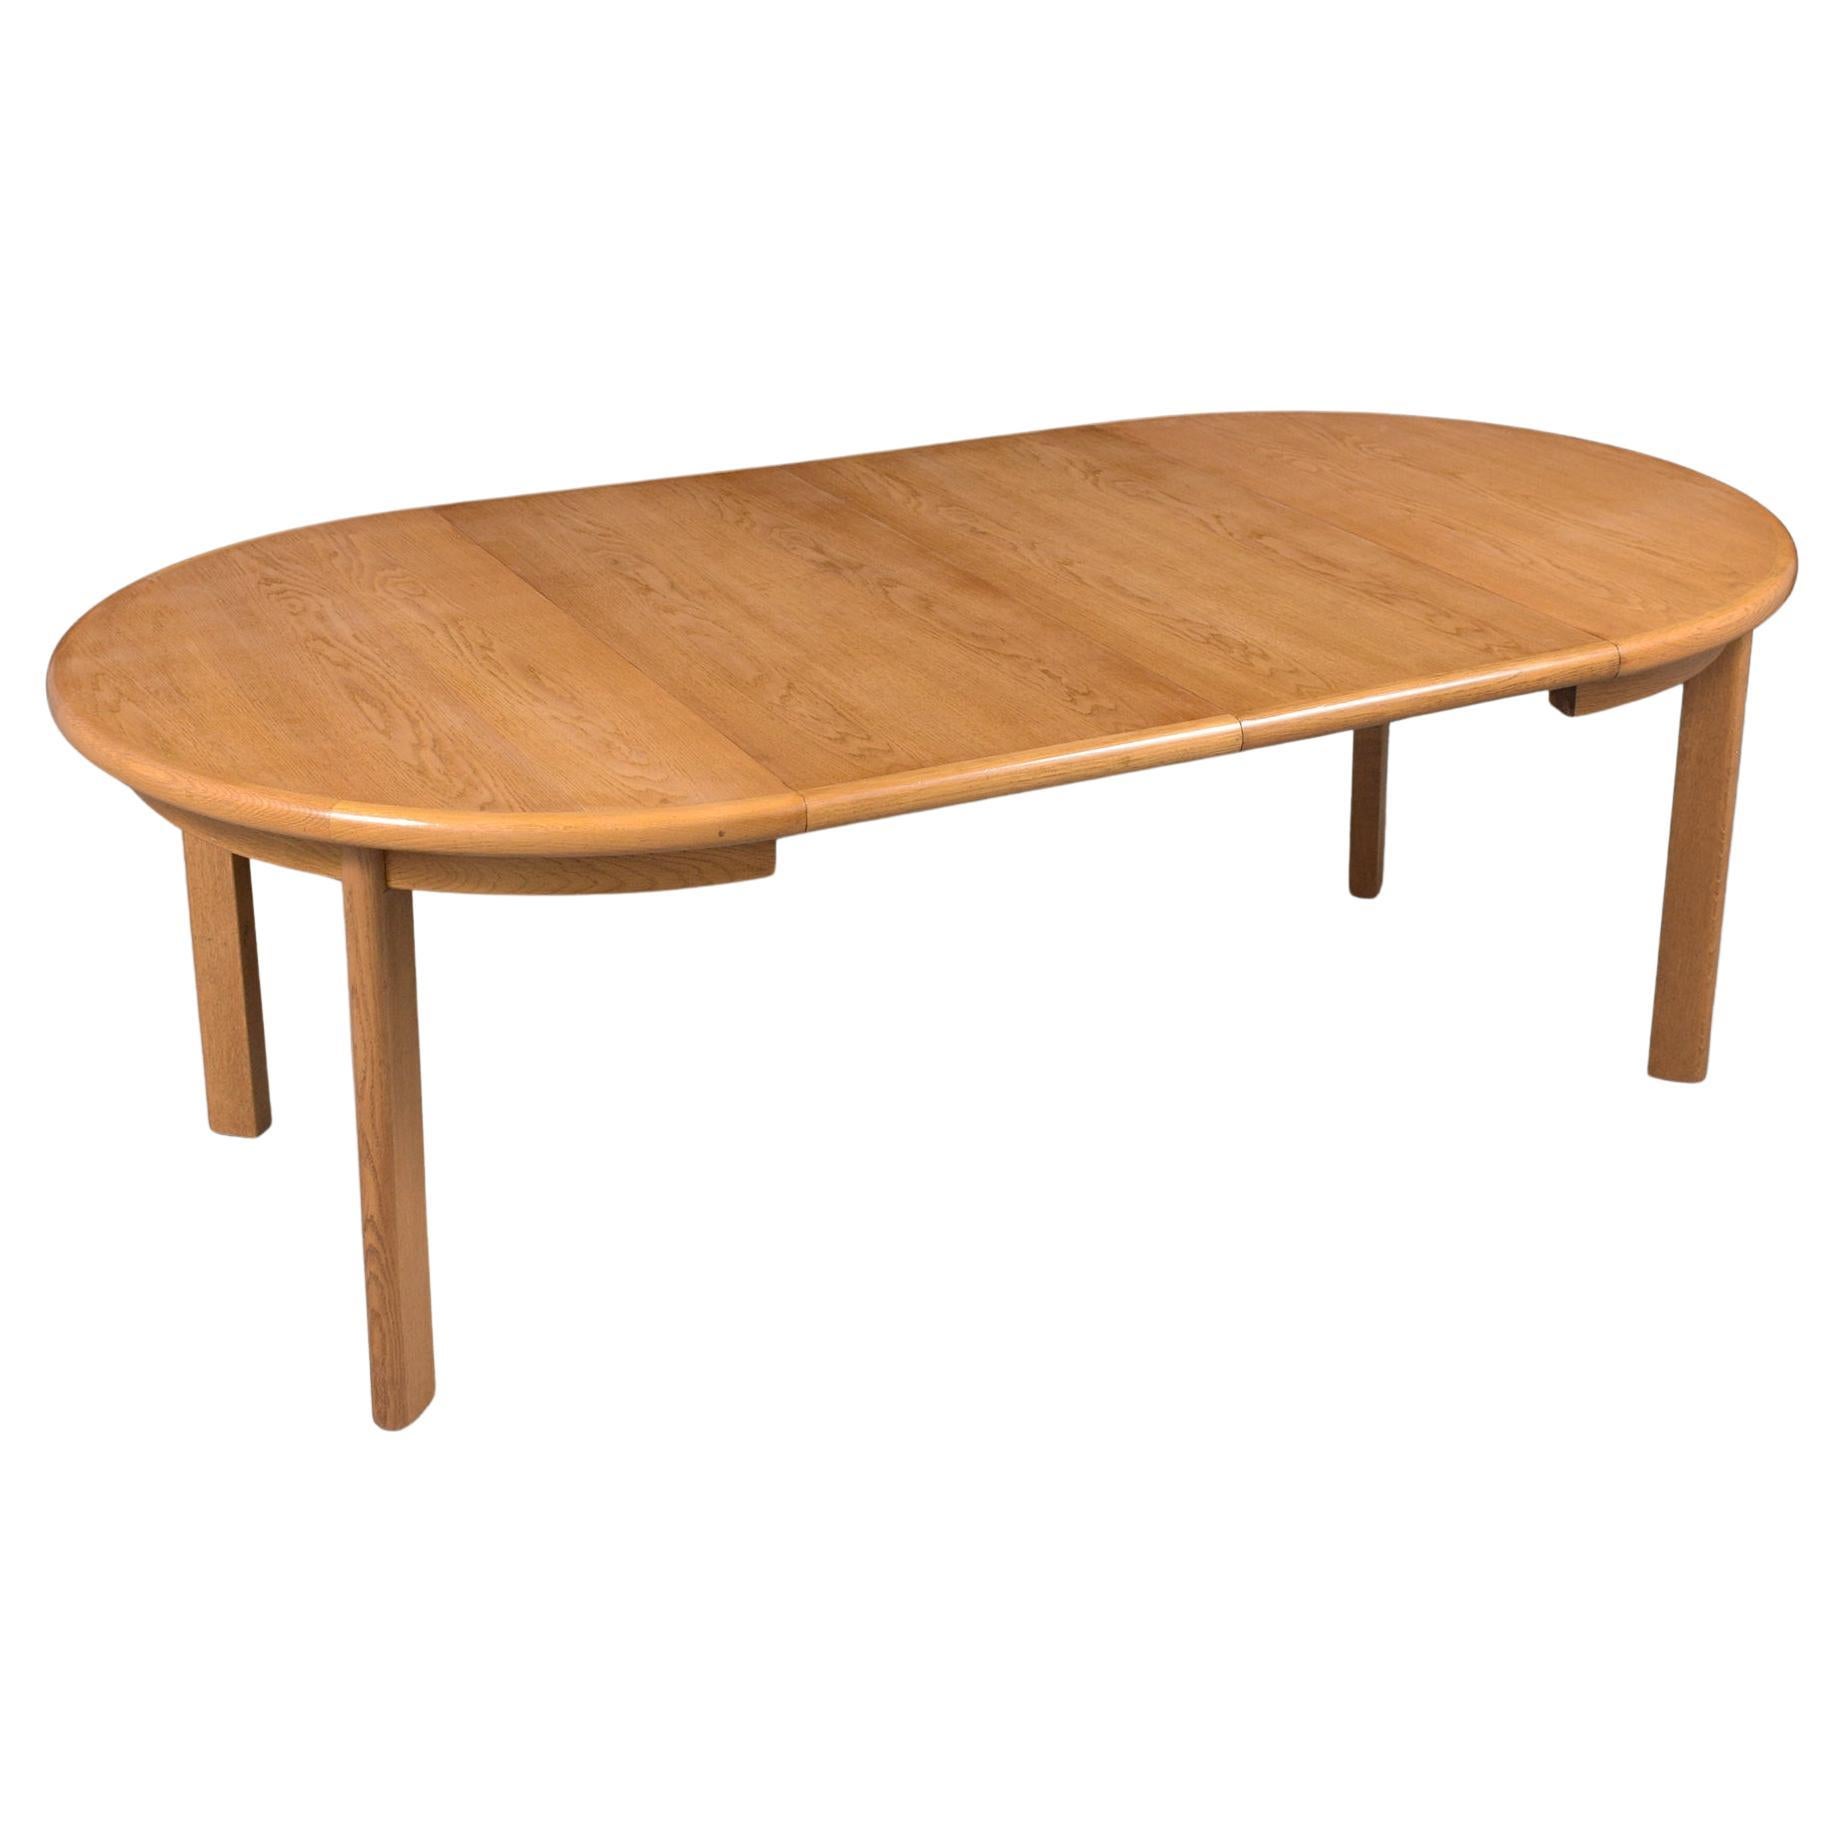 1970s Danish Modern Teak Dining Table with Extendable Leaves For Sale